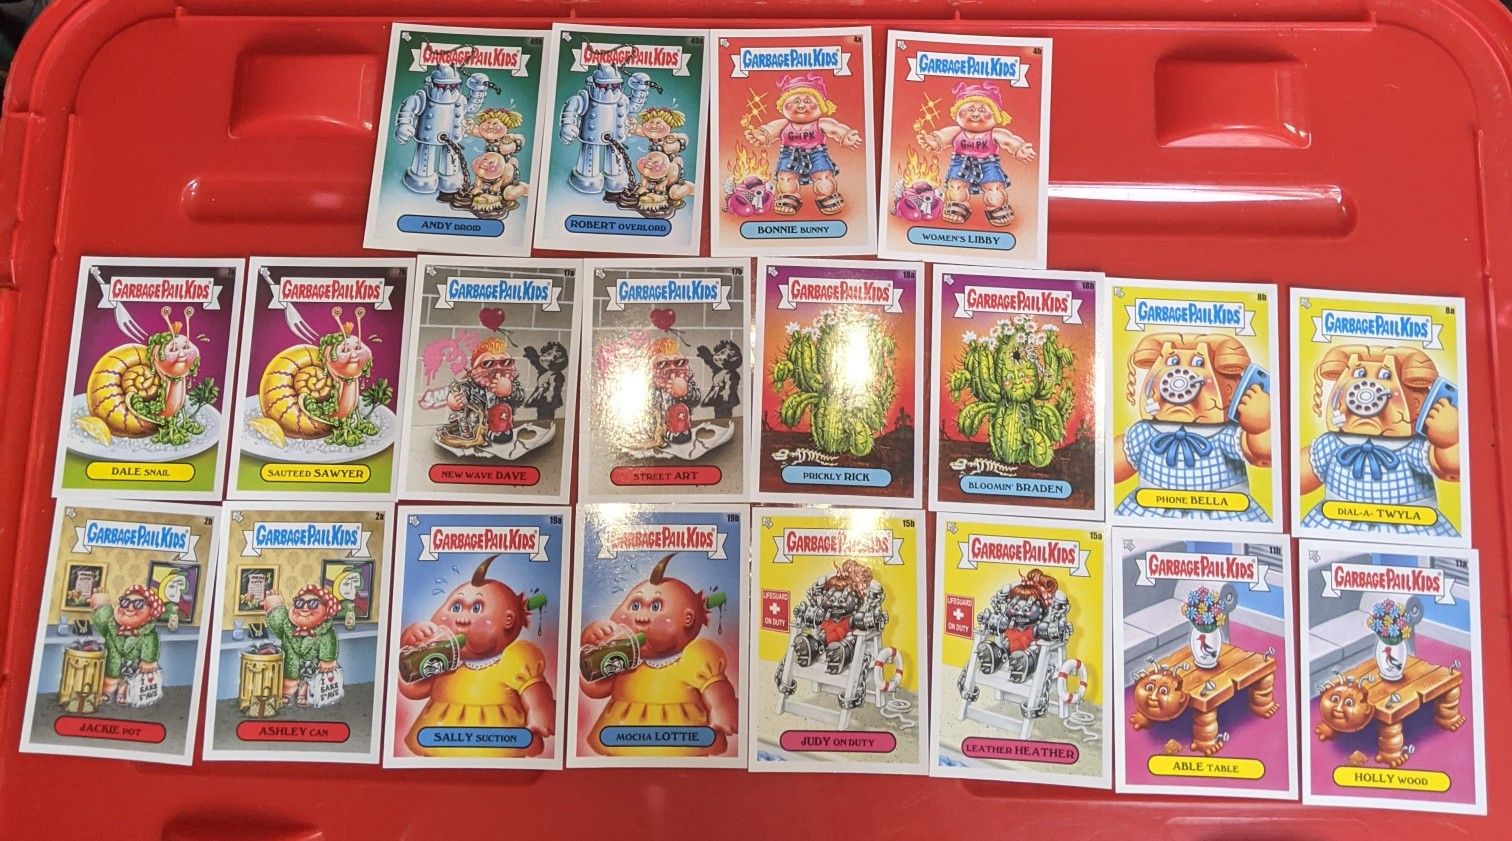 Garbage Pail Kids Cards All Pairs lot 20 Stickers Total Topps GPK